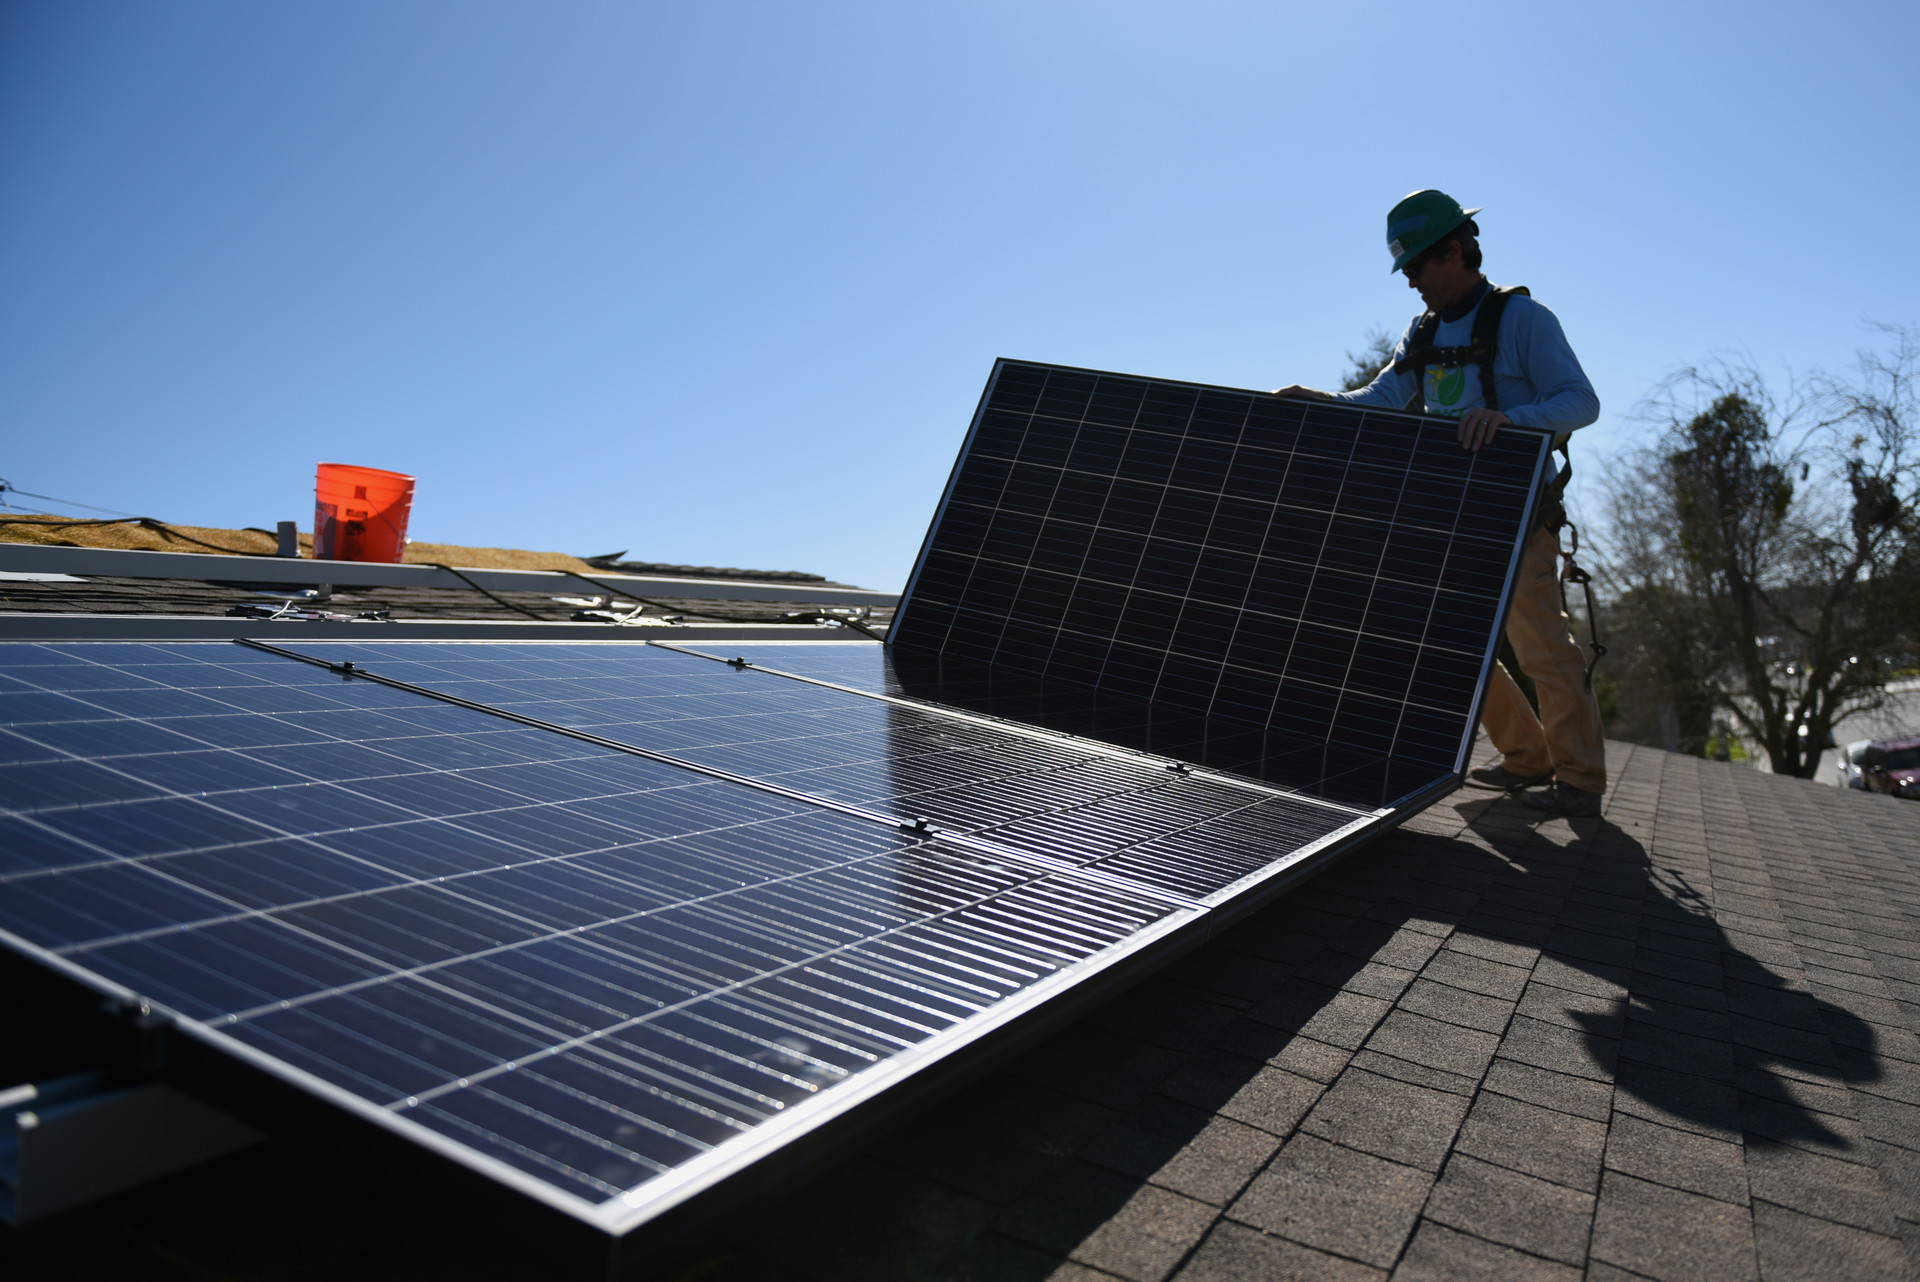 A man in a hard hat installs solar panels on the roof of a house.